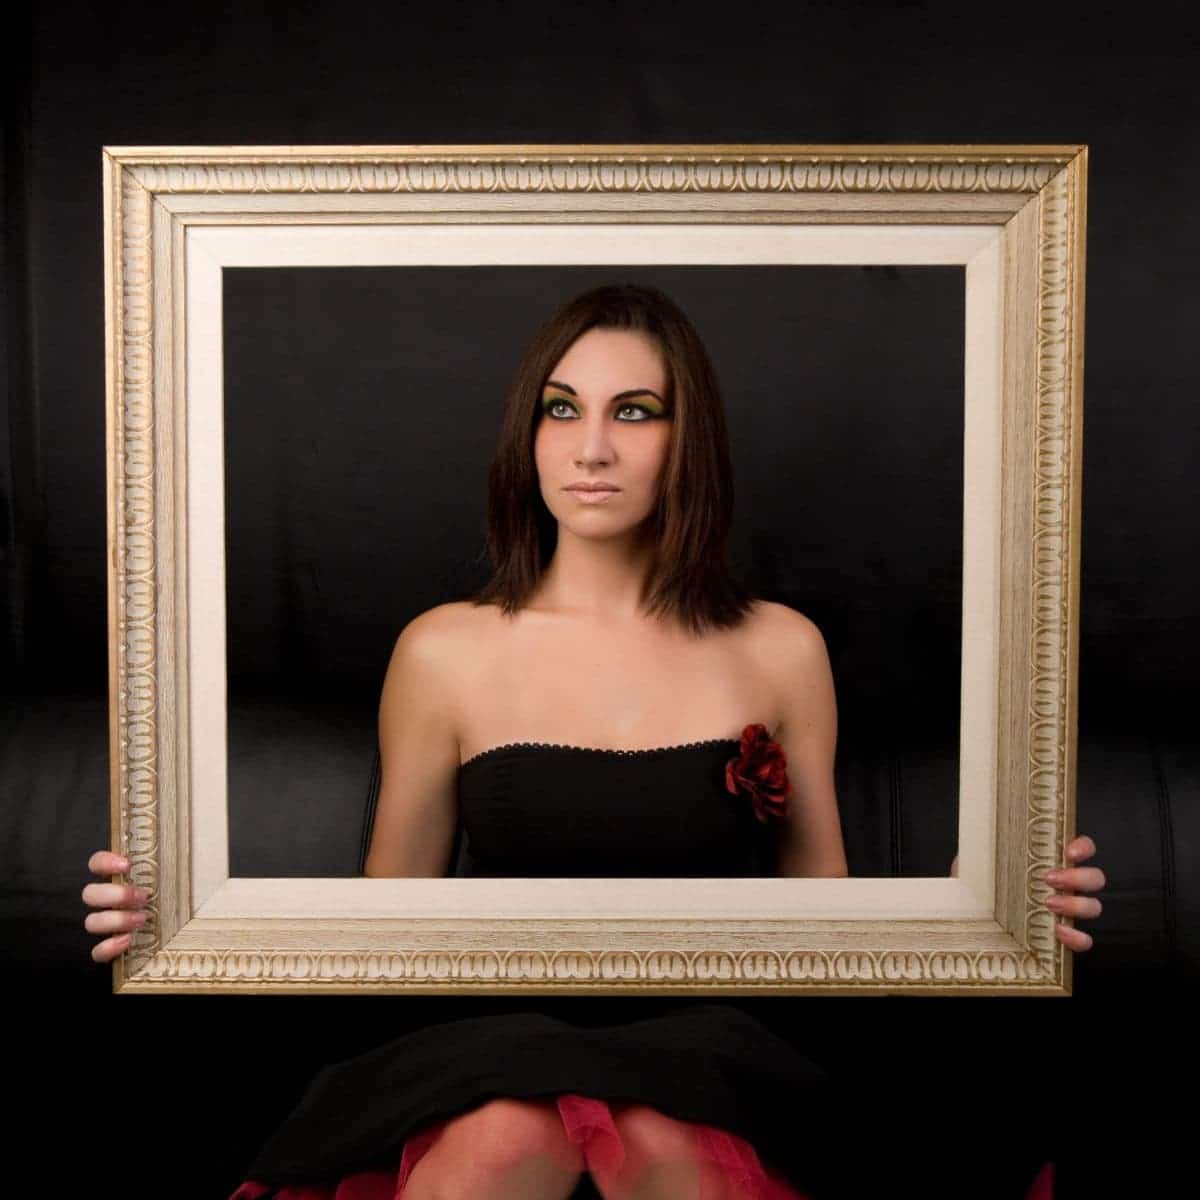 Portrait of a woman holding a frame.